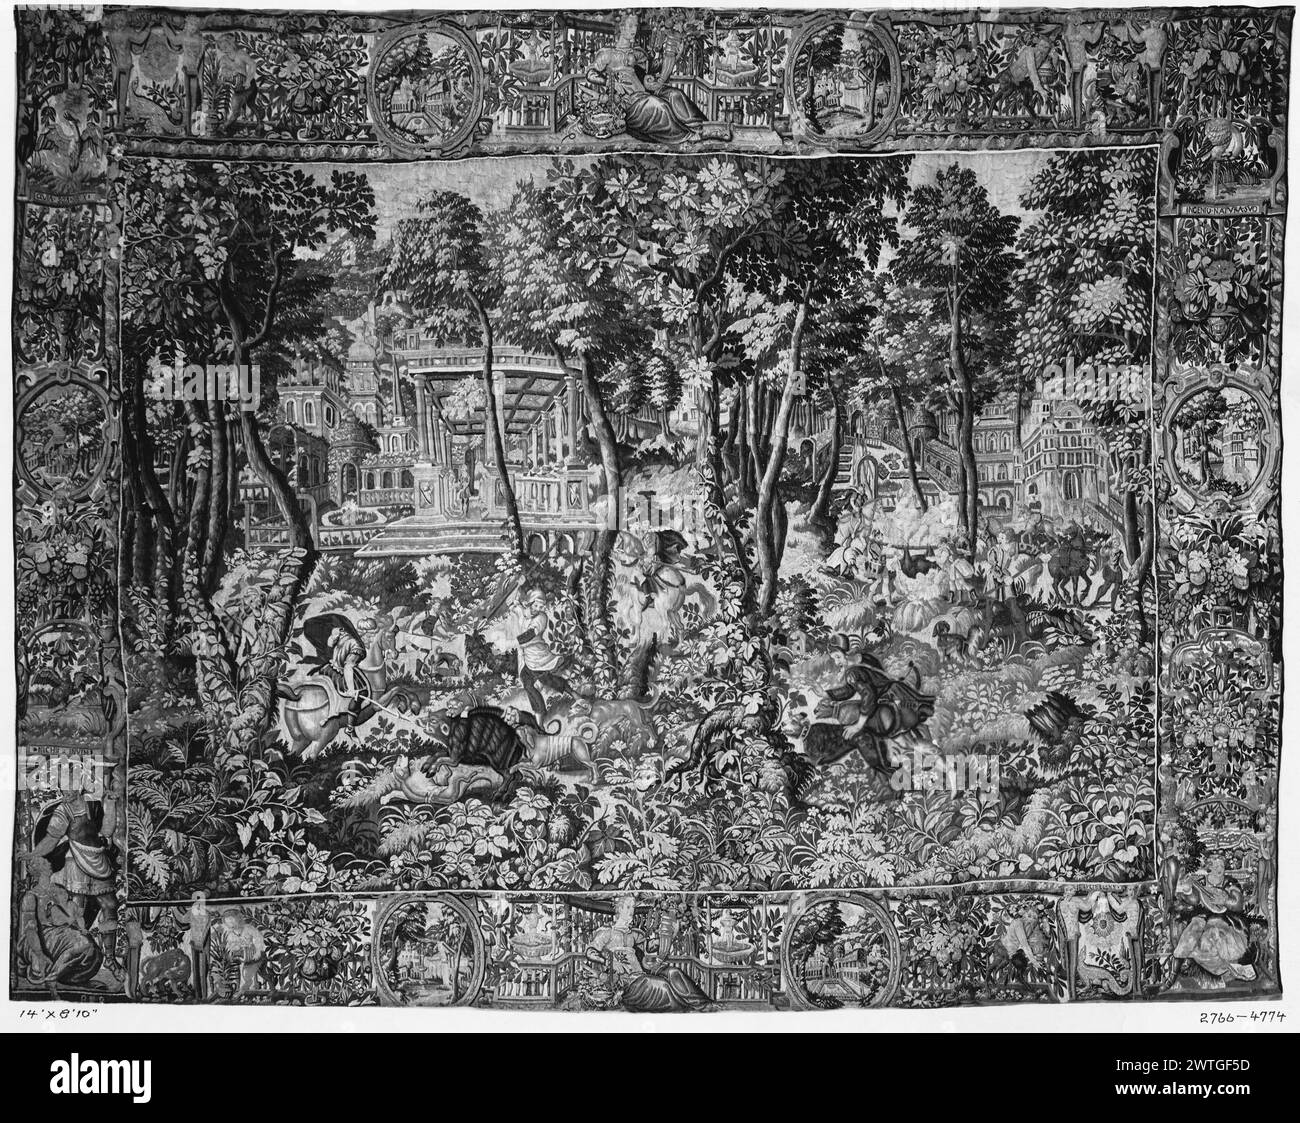 Game park with boar hunt. unknown c. 1580-1600 Tapestry Dimensions: H 10'8' x W 14' Tapestry Materials/Techniques: wool; linen Culture: Flemish Weaving Center: Brussels Ownership History: French & Co. purchased from Charles (1/2 interest); transferred to stock number 4774 [SS 7232]. French & Co. purchased from Charles 3/23/1918; sold to John S. Keshishyan 1/22/1929 [SS 4774]. Gift of Wilber Leigh Batteson. Exhibited: 'Woven Myths & History' Los Angeles County Museum of Art 4/28-9/11/1983. United States, California, Los Angeles, Los Angeles County Museum of Art, accno. 57.57. Inscriptions: City Stock Photo